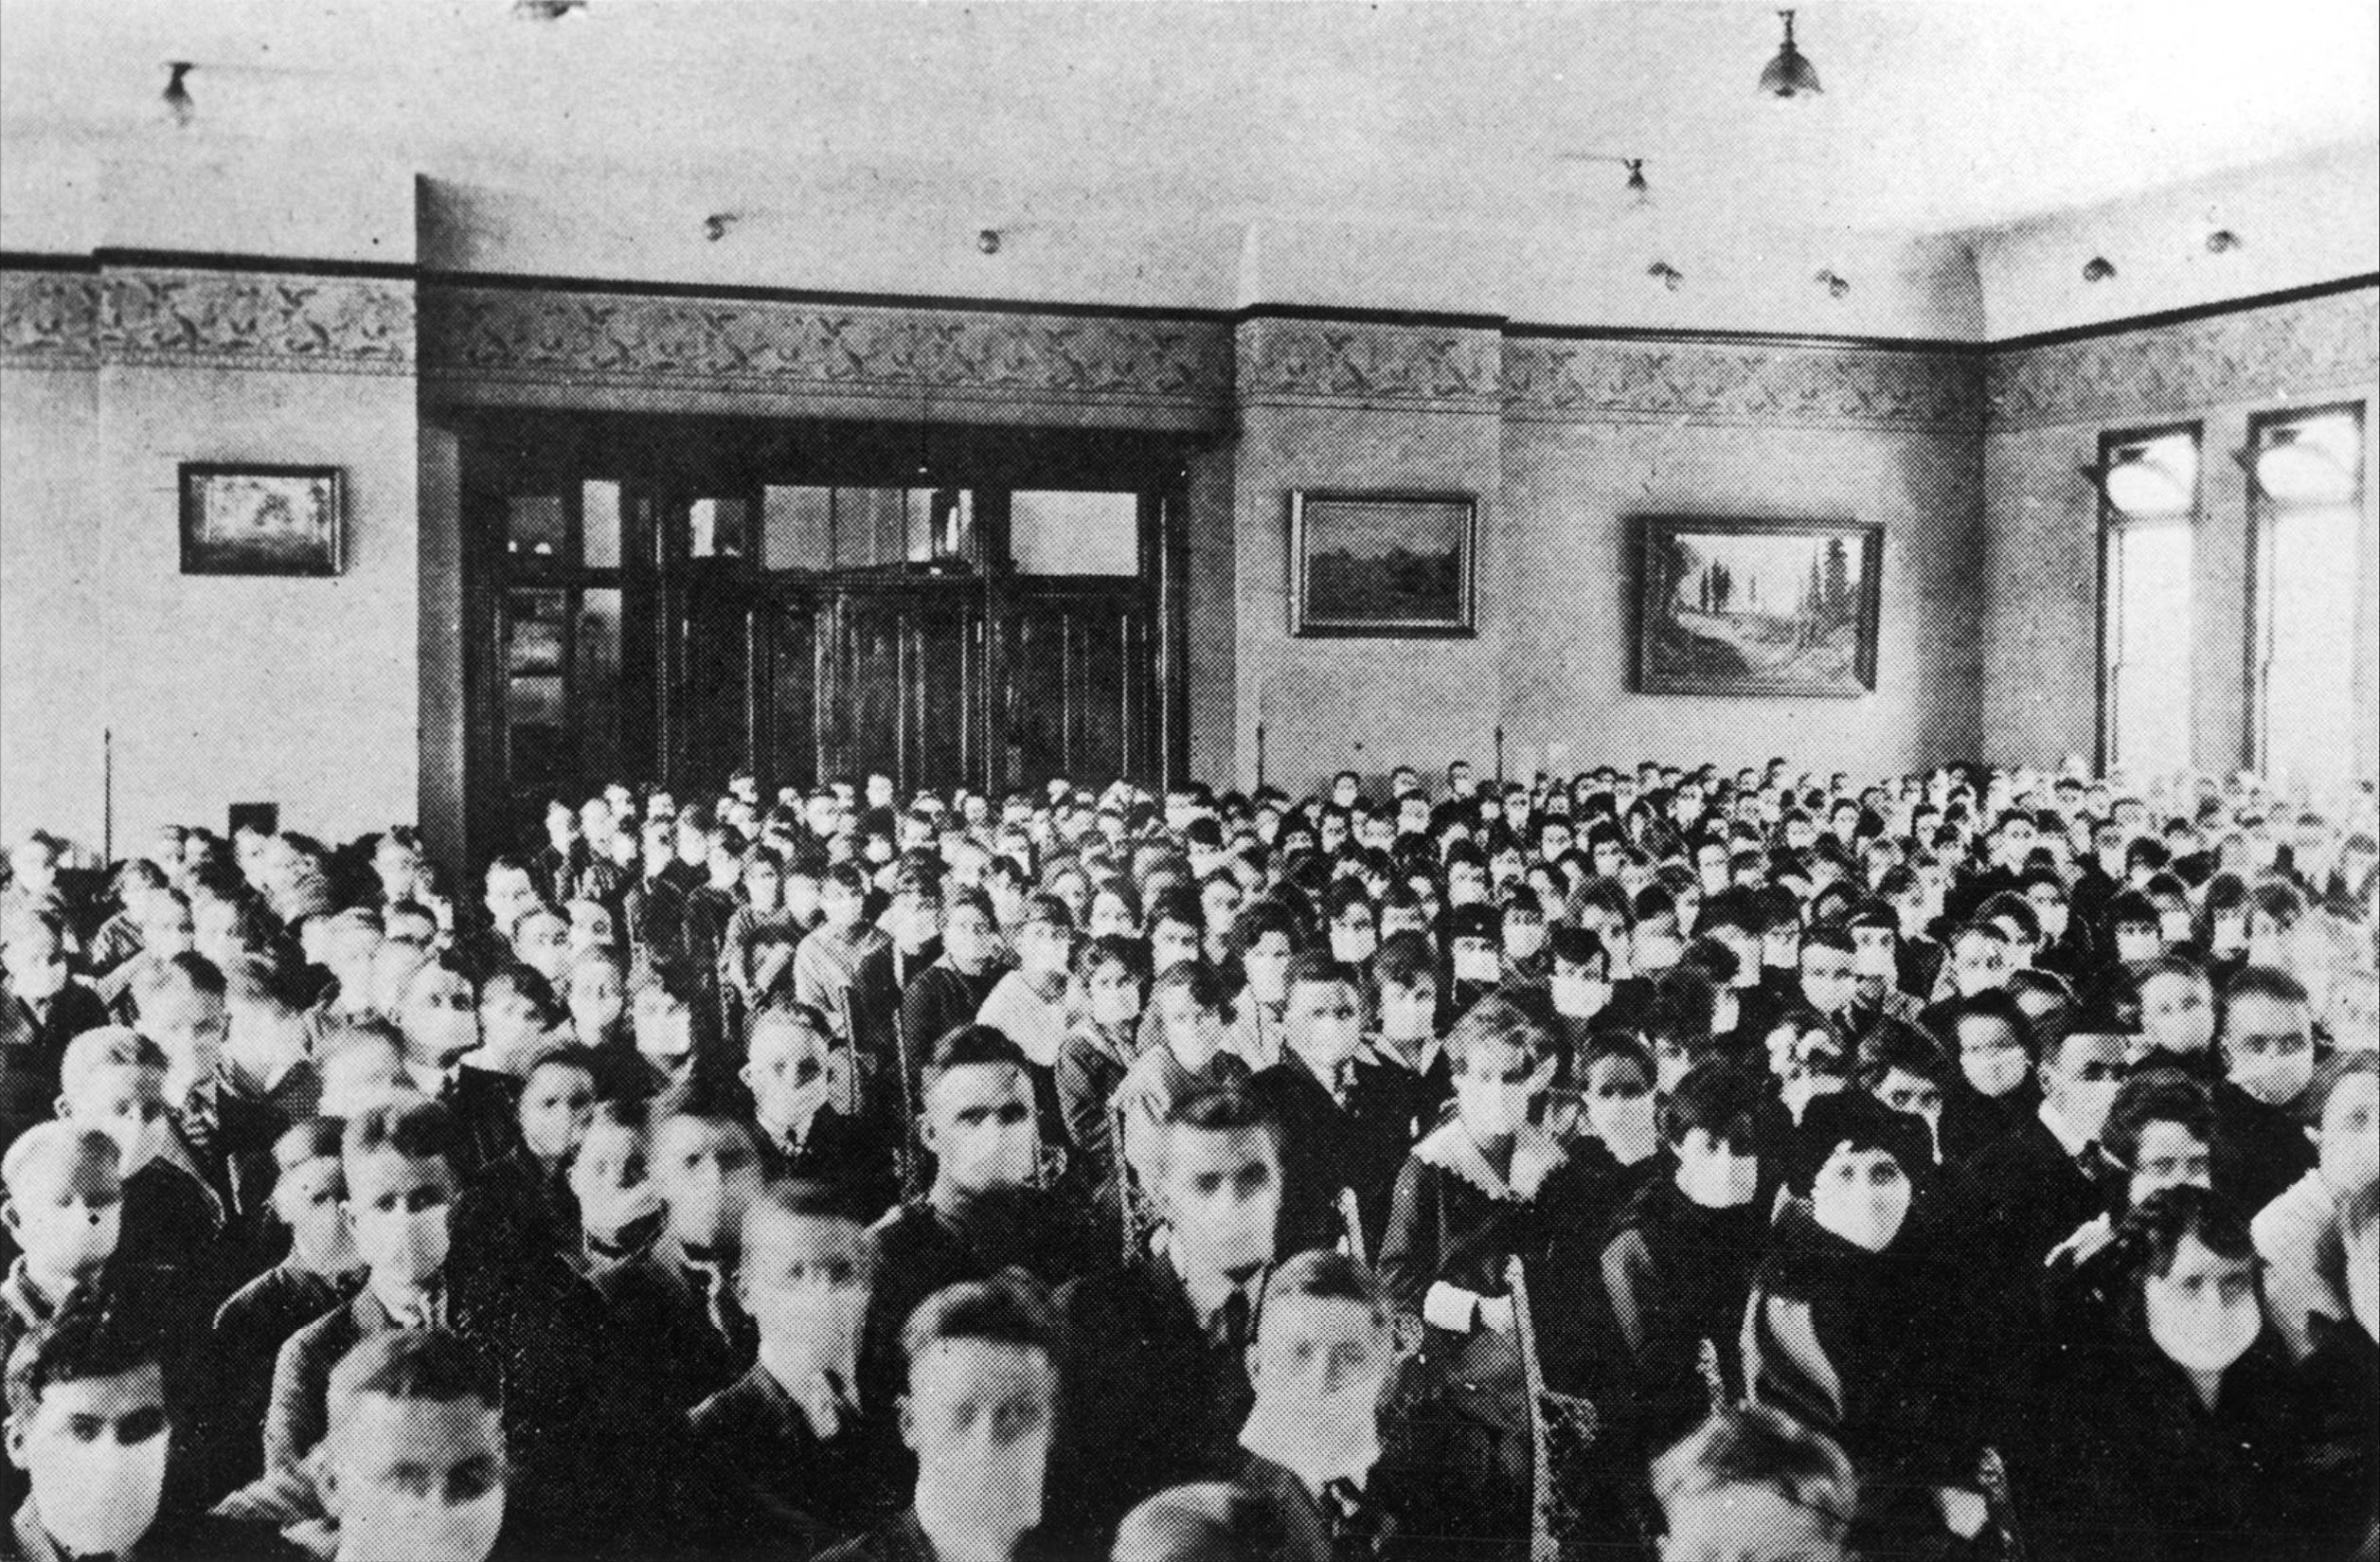 A Classroom of BYU students in 1919 wearing white medical masks